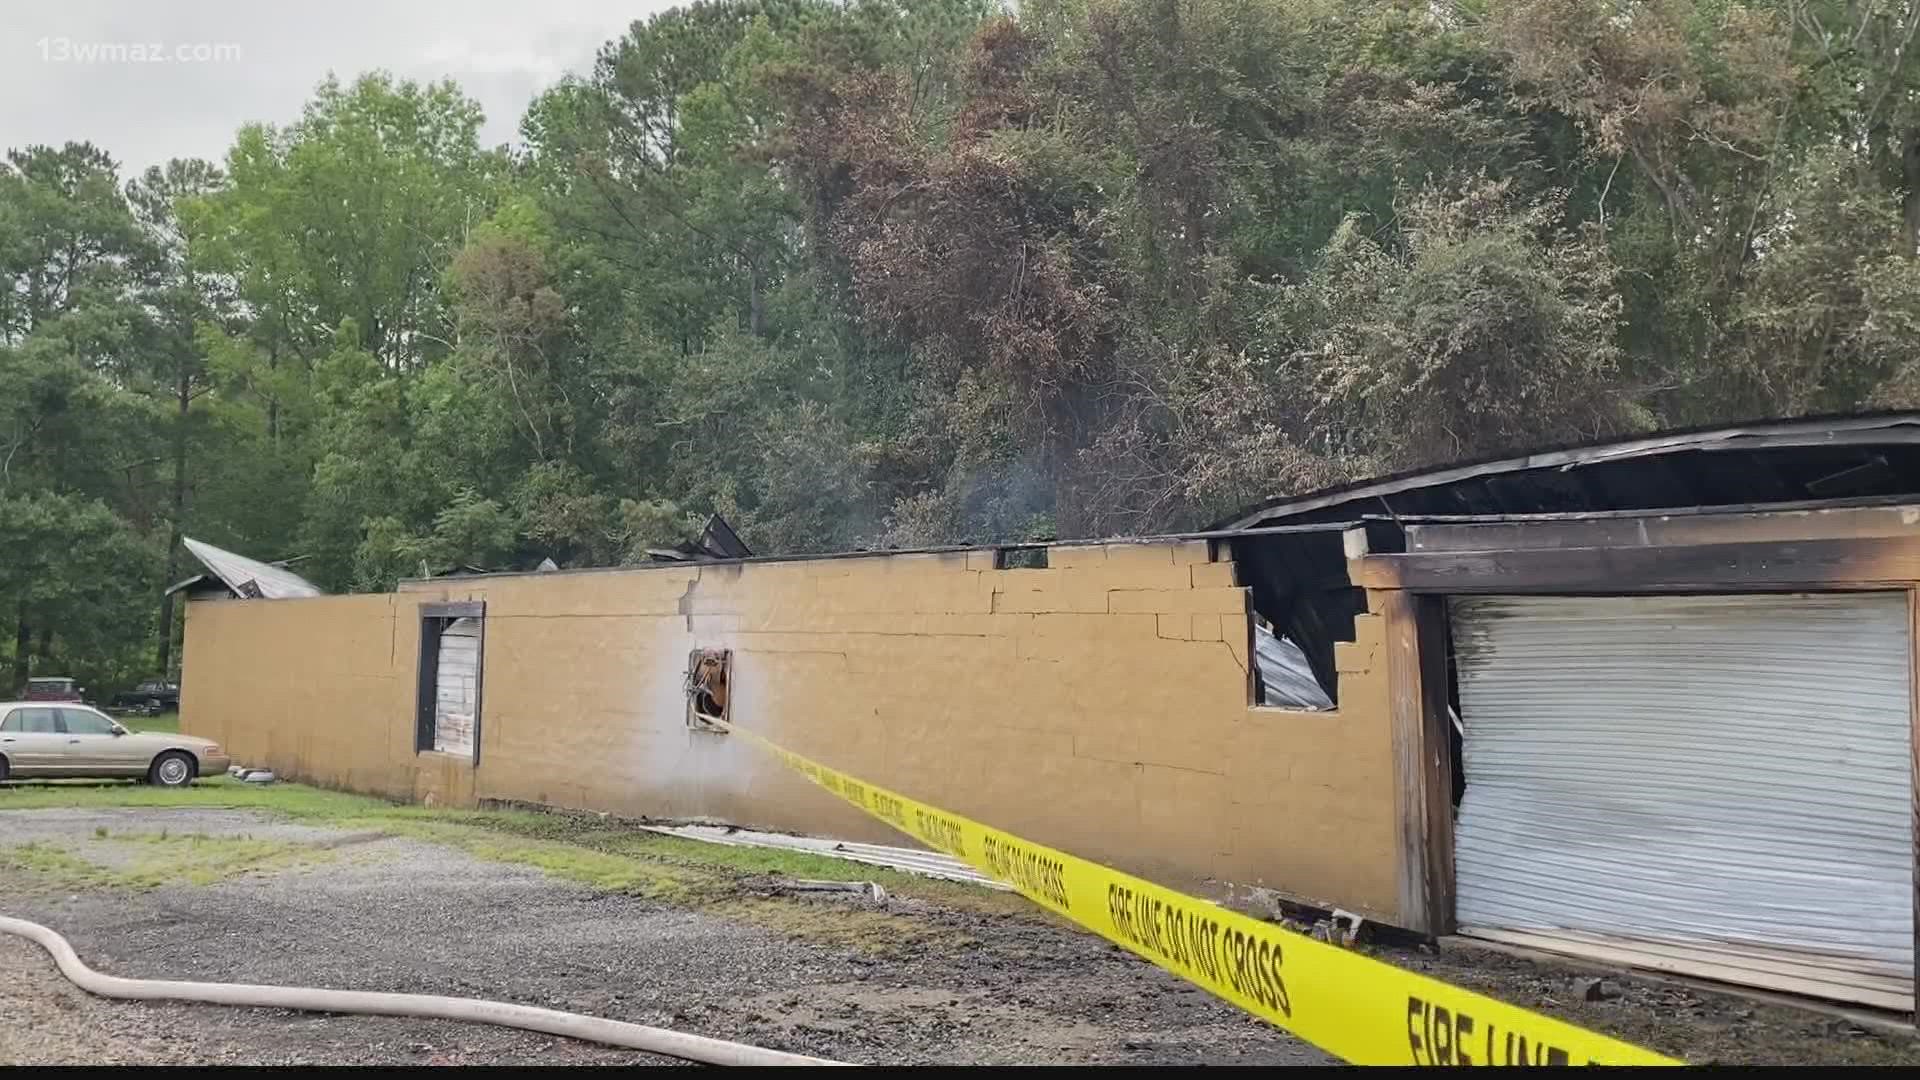 Fire crews worked over 9 hours to put out a fire at a Milledgeville business on Monday.